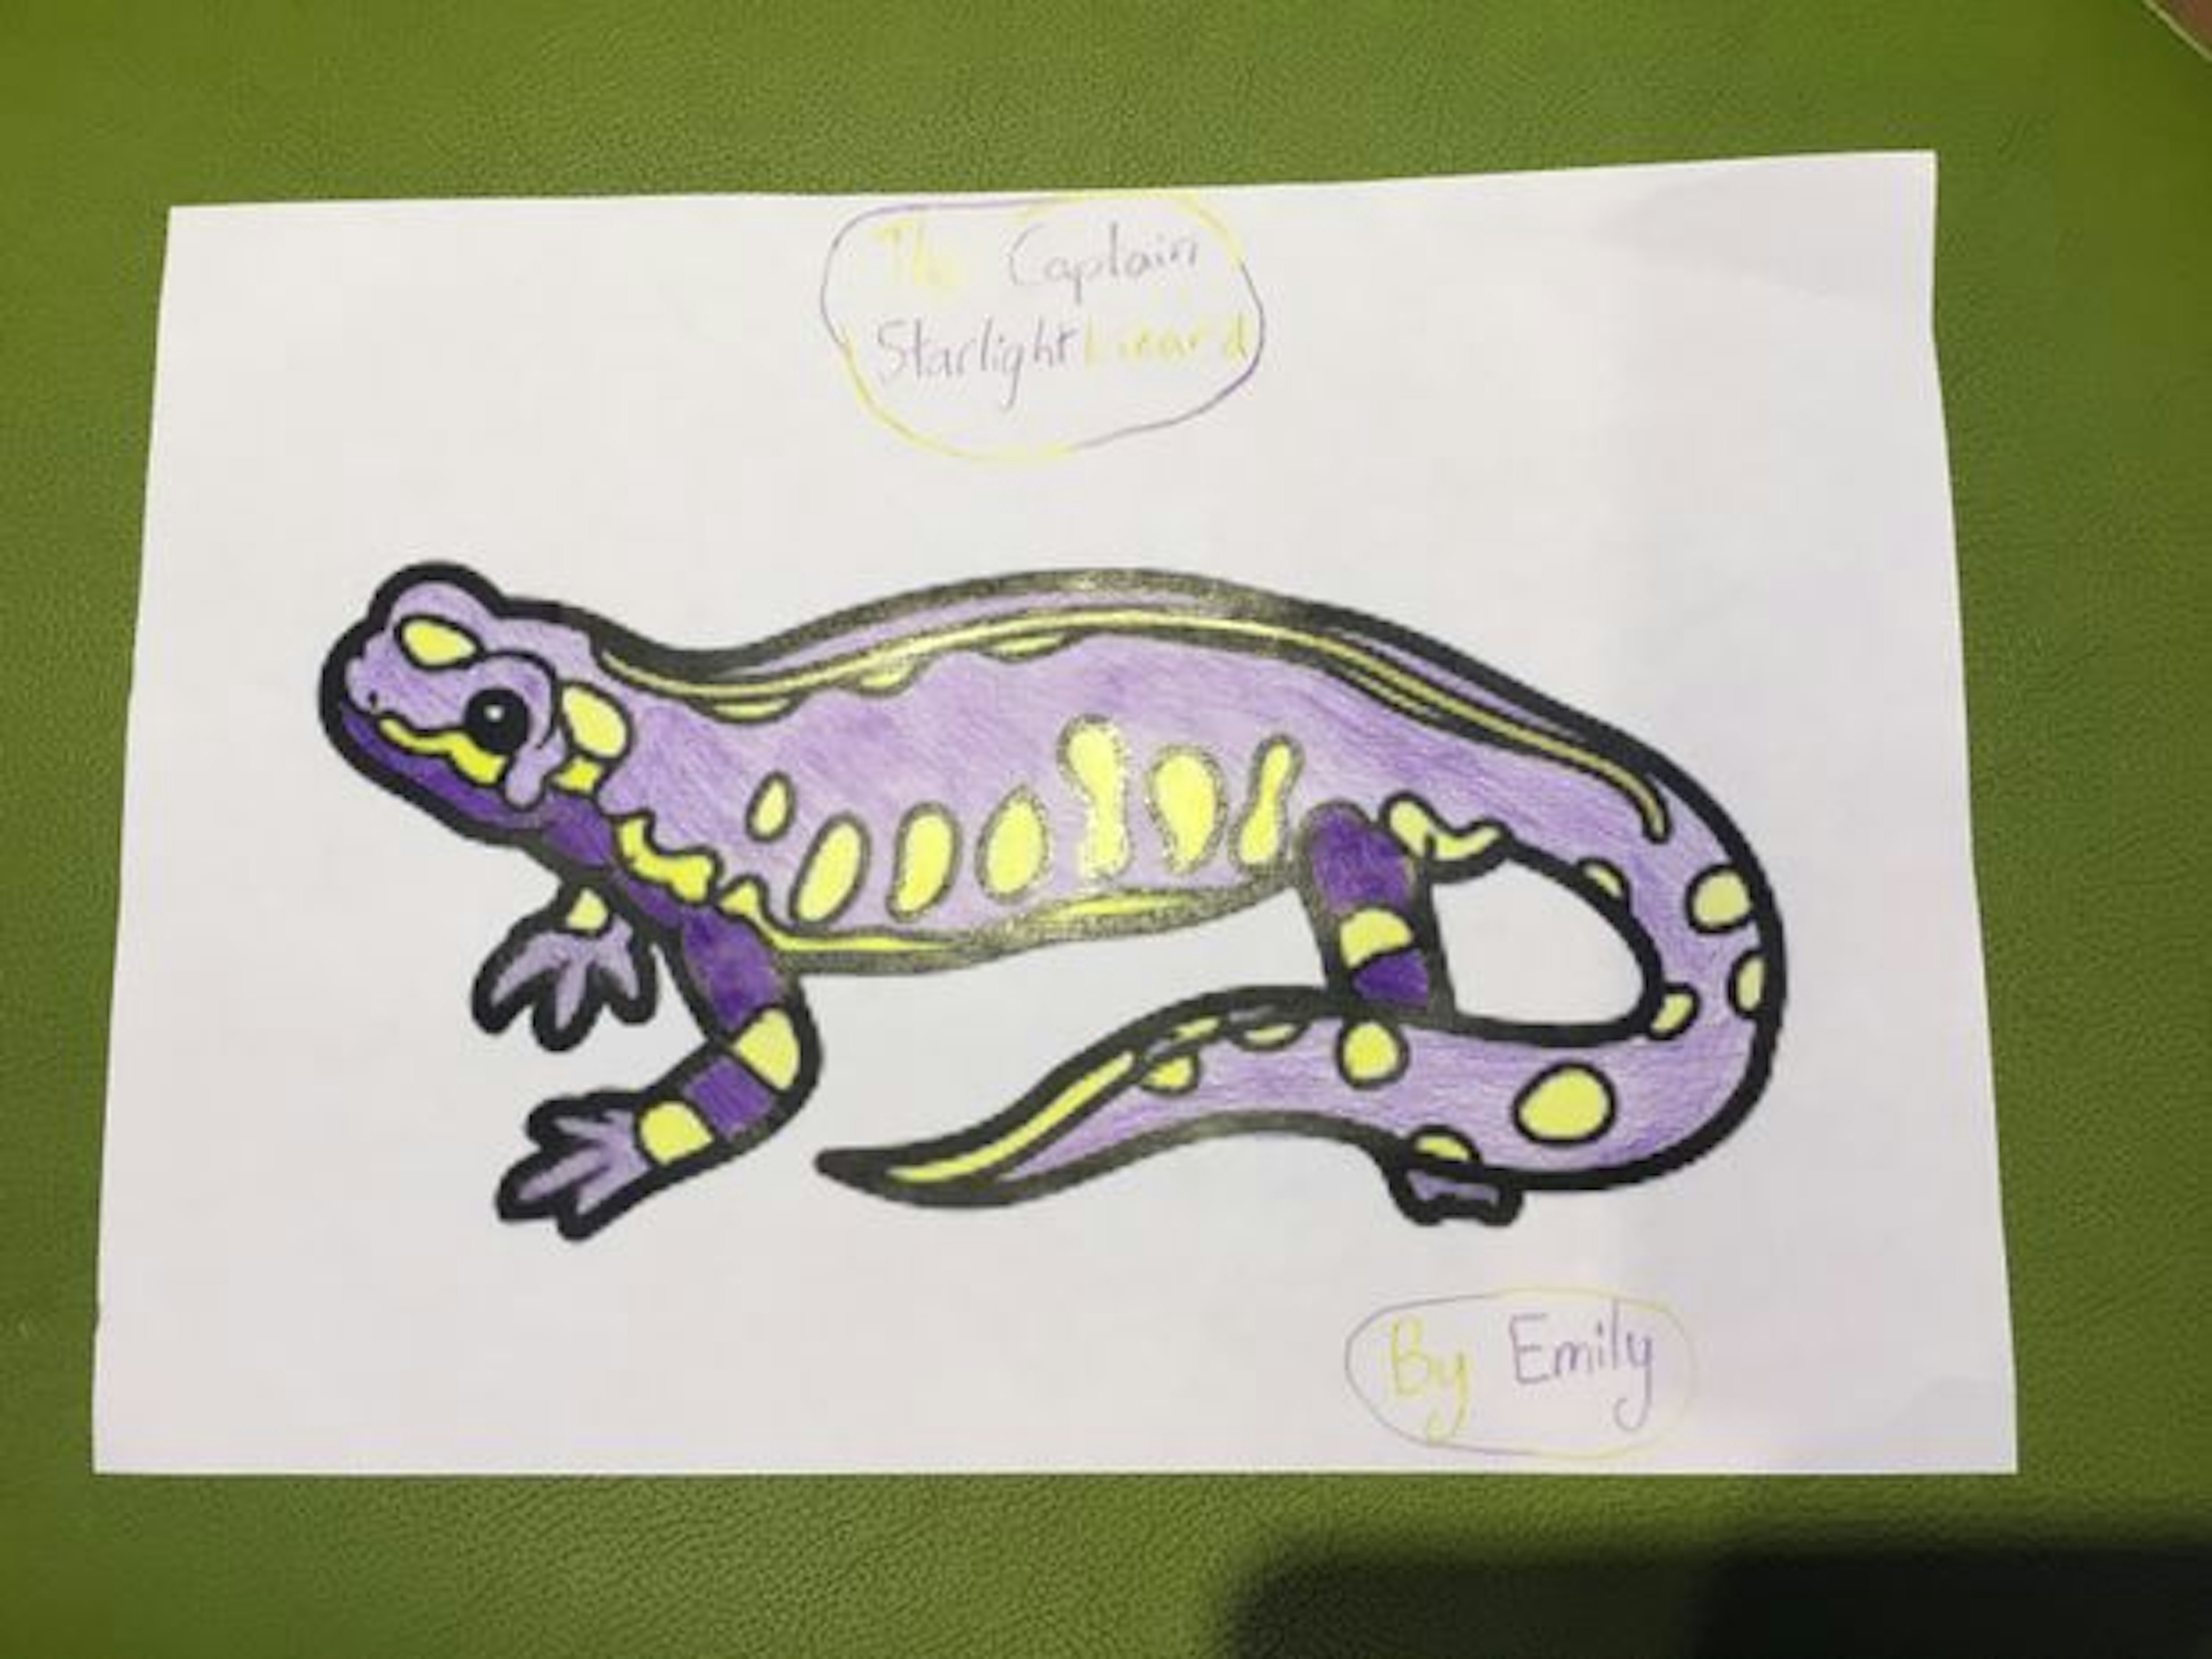 I accepted a challenge from two Starlight Captains and this is the result. I had a lot of fun colouring in the lizard in Starlight colours, and this lizard is also a colouring in from the starlight room. #theStarlightRoomisawesome